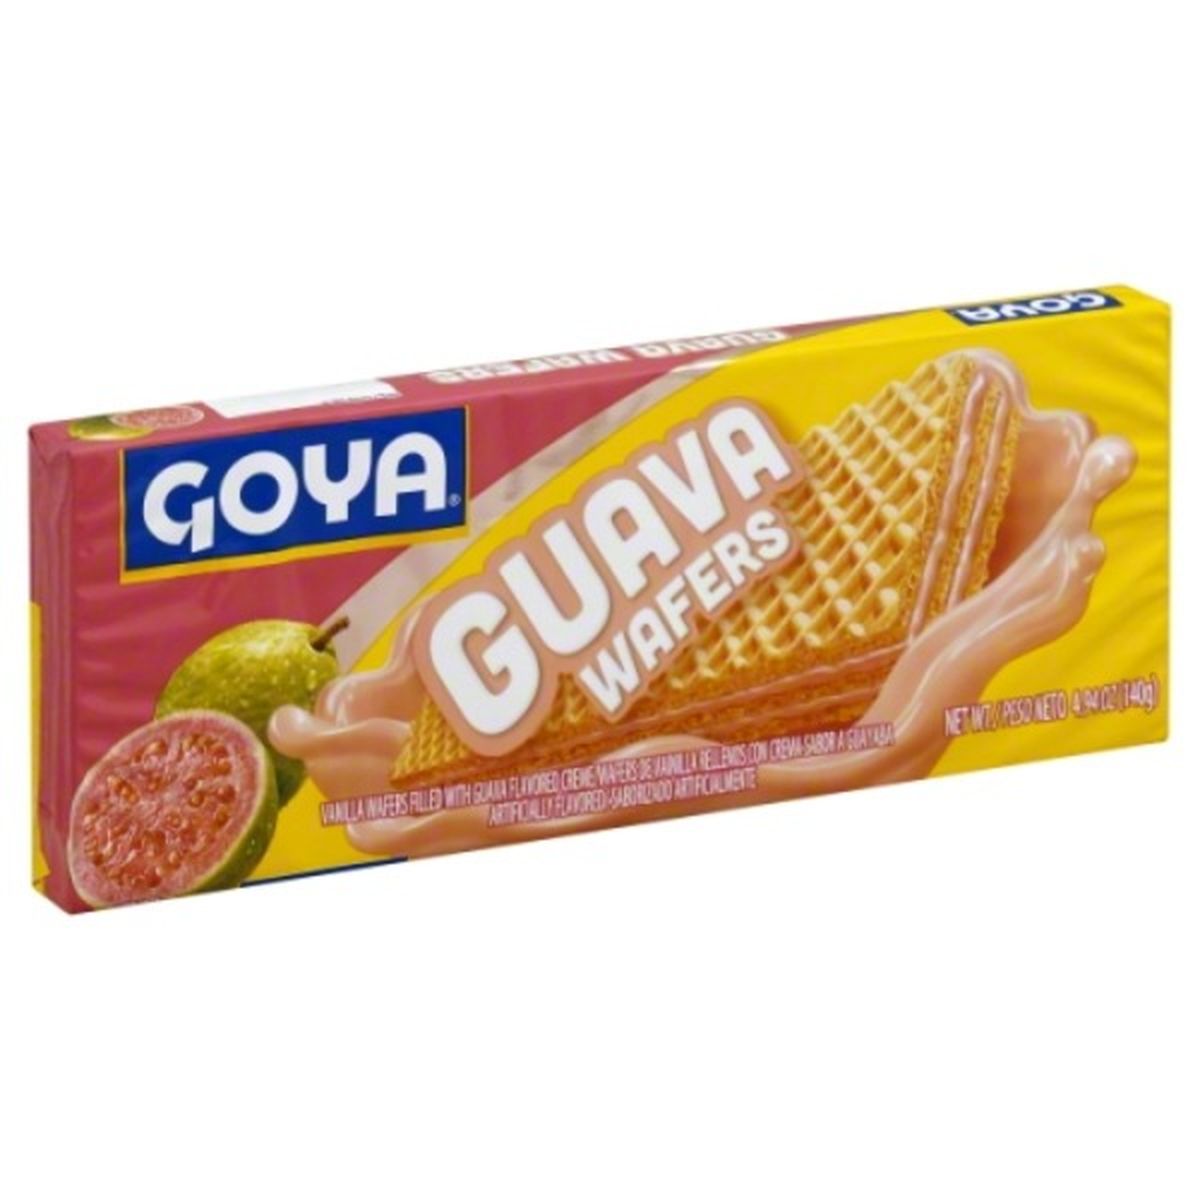 Calories in Goya Wafers, Guava